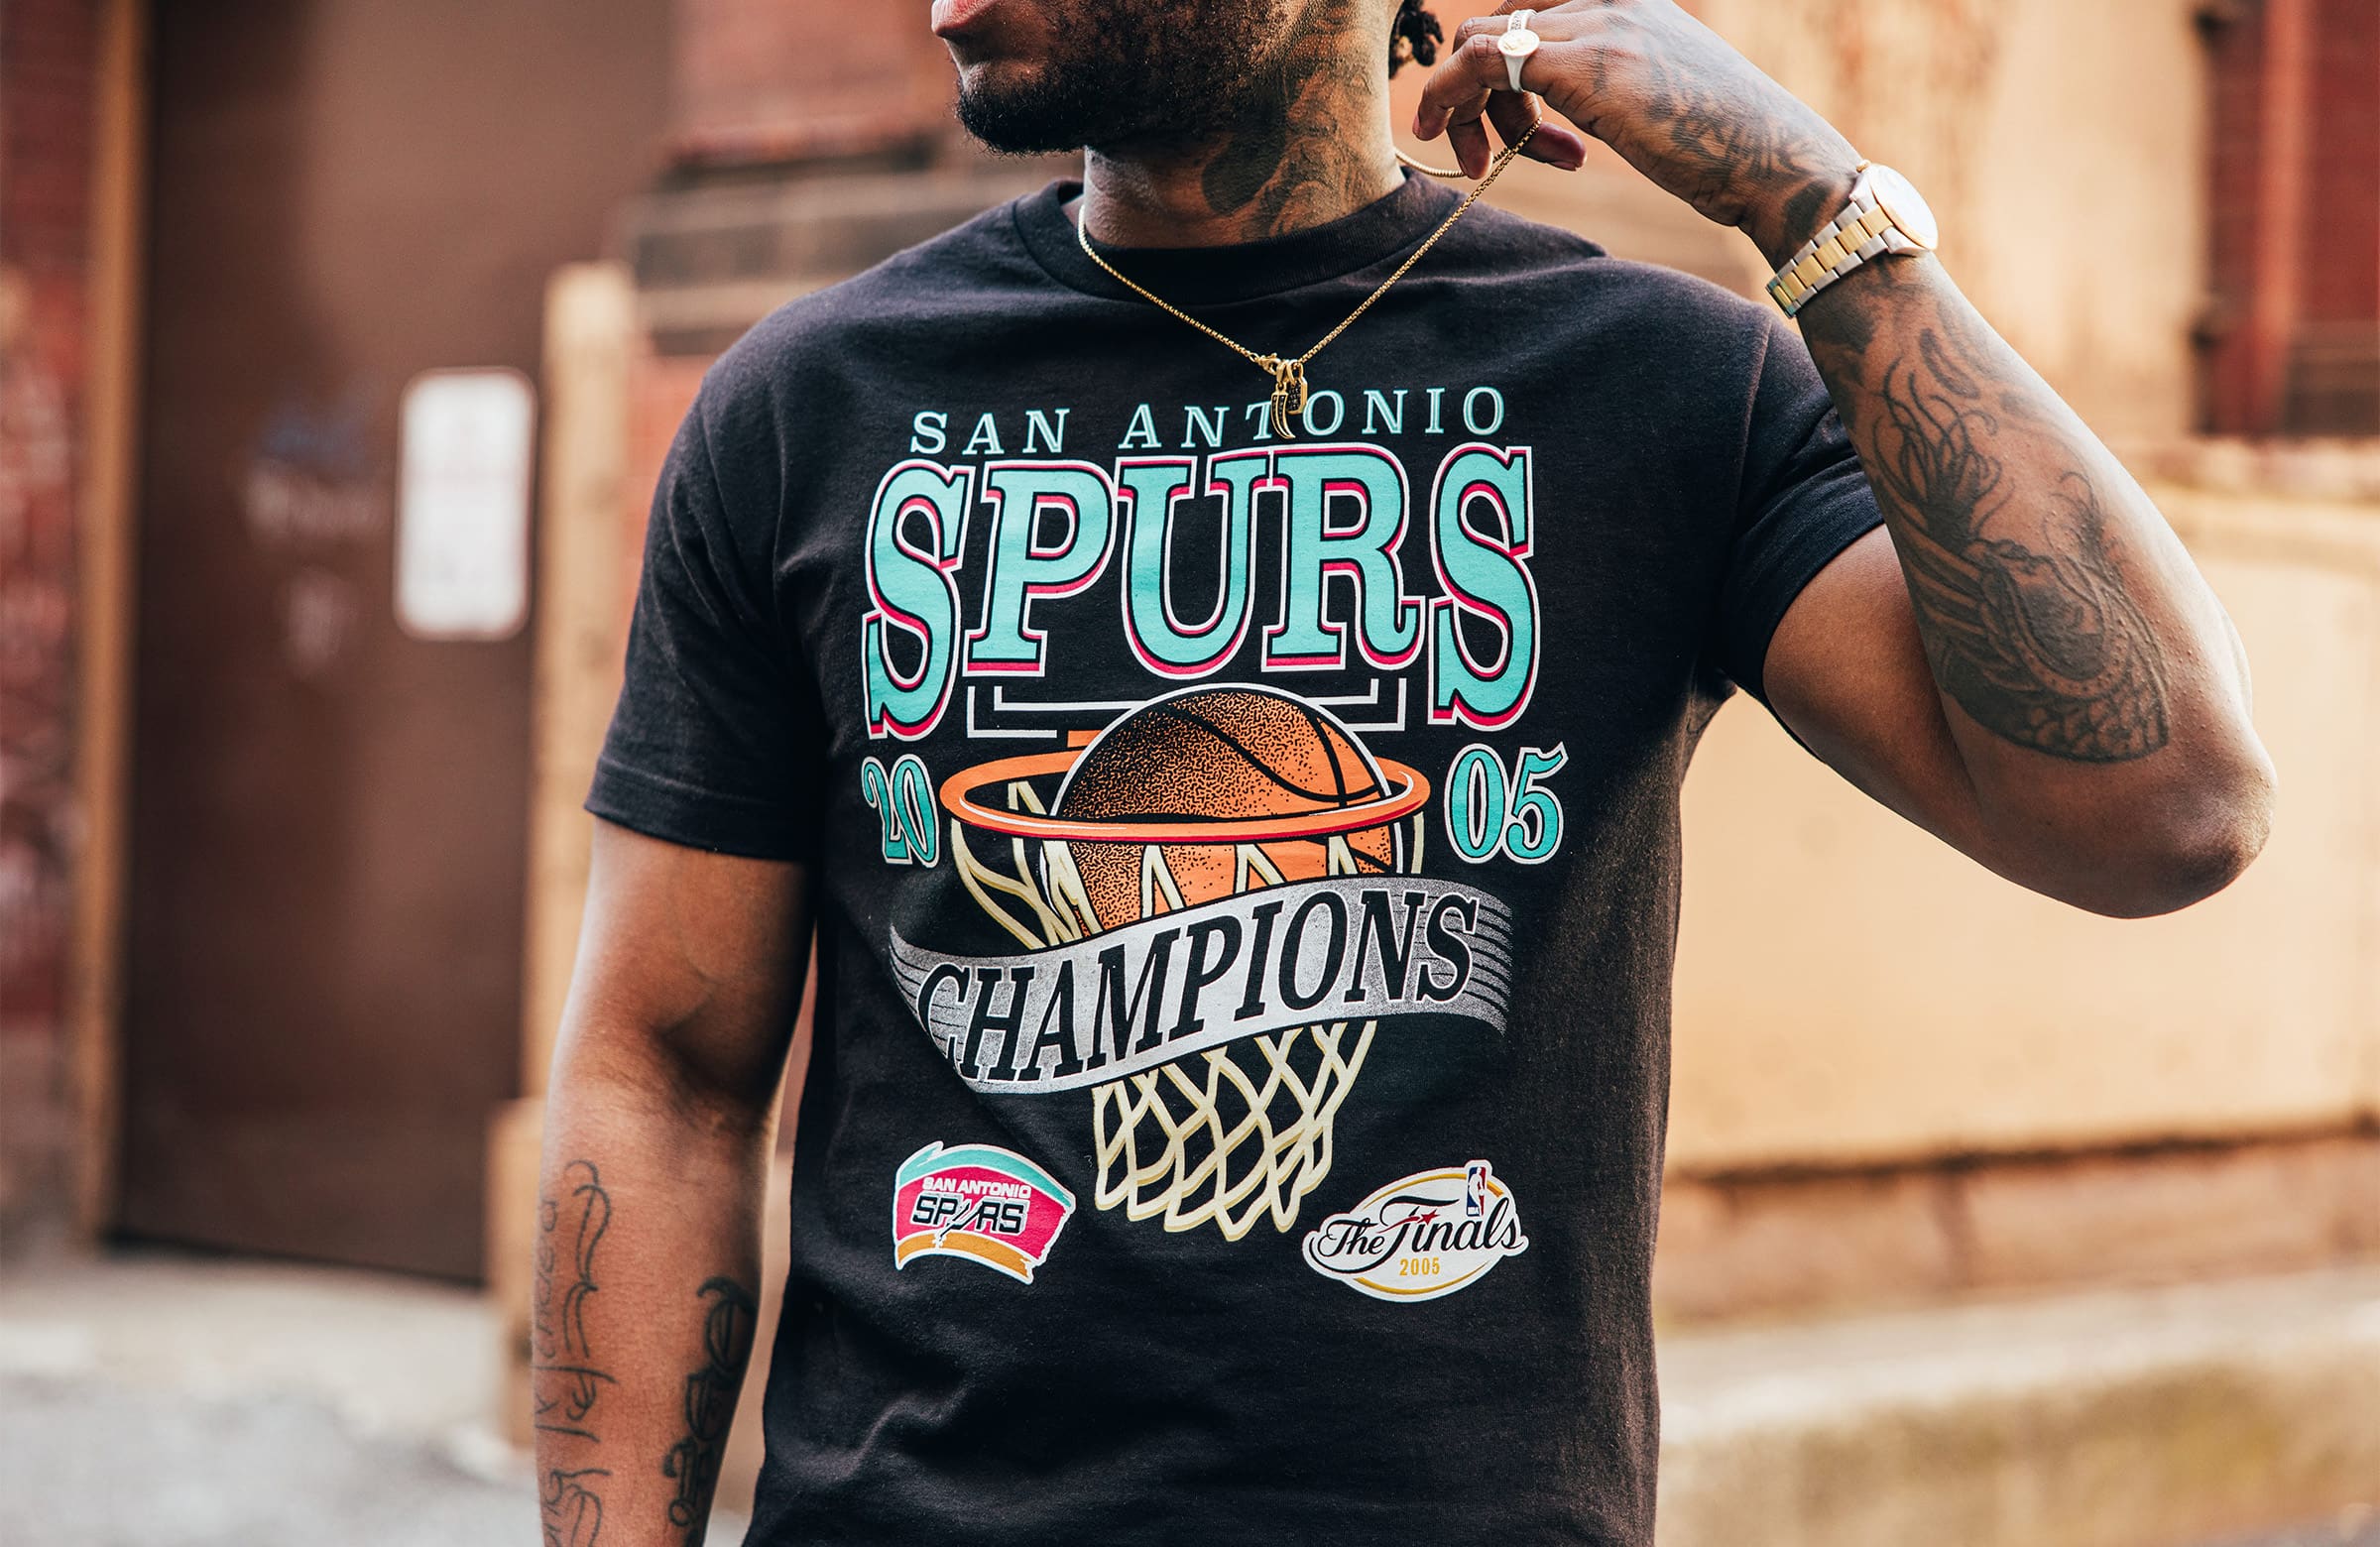 Mitchell and Ness release new Spurs retro-themed gear